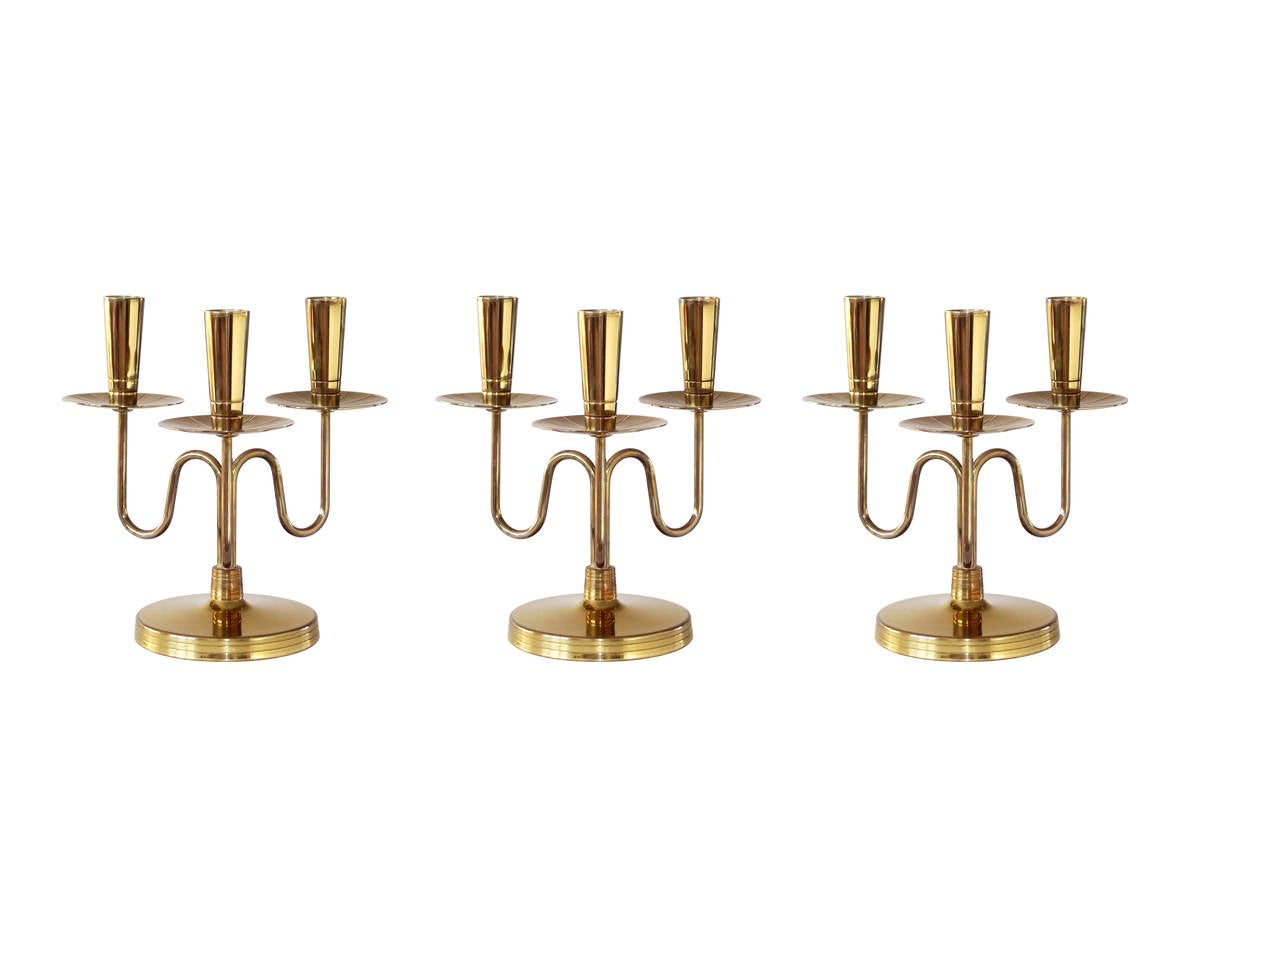 A set of three matching candleholders executed in lacquered solid brass by Tommi Parzinger for Dorlyn Silversmiths. Exceptional craftsmanship and classically modern. All original condition.

Professional re-lacquering and polishing available at